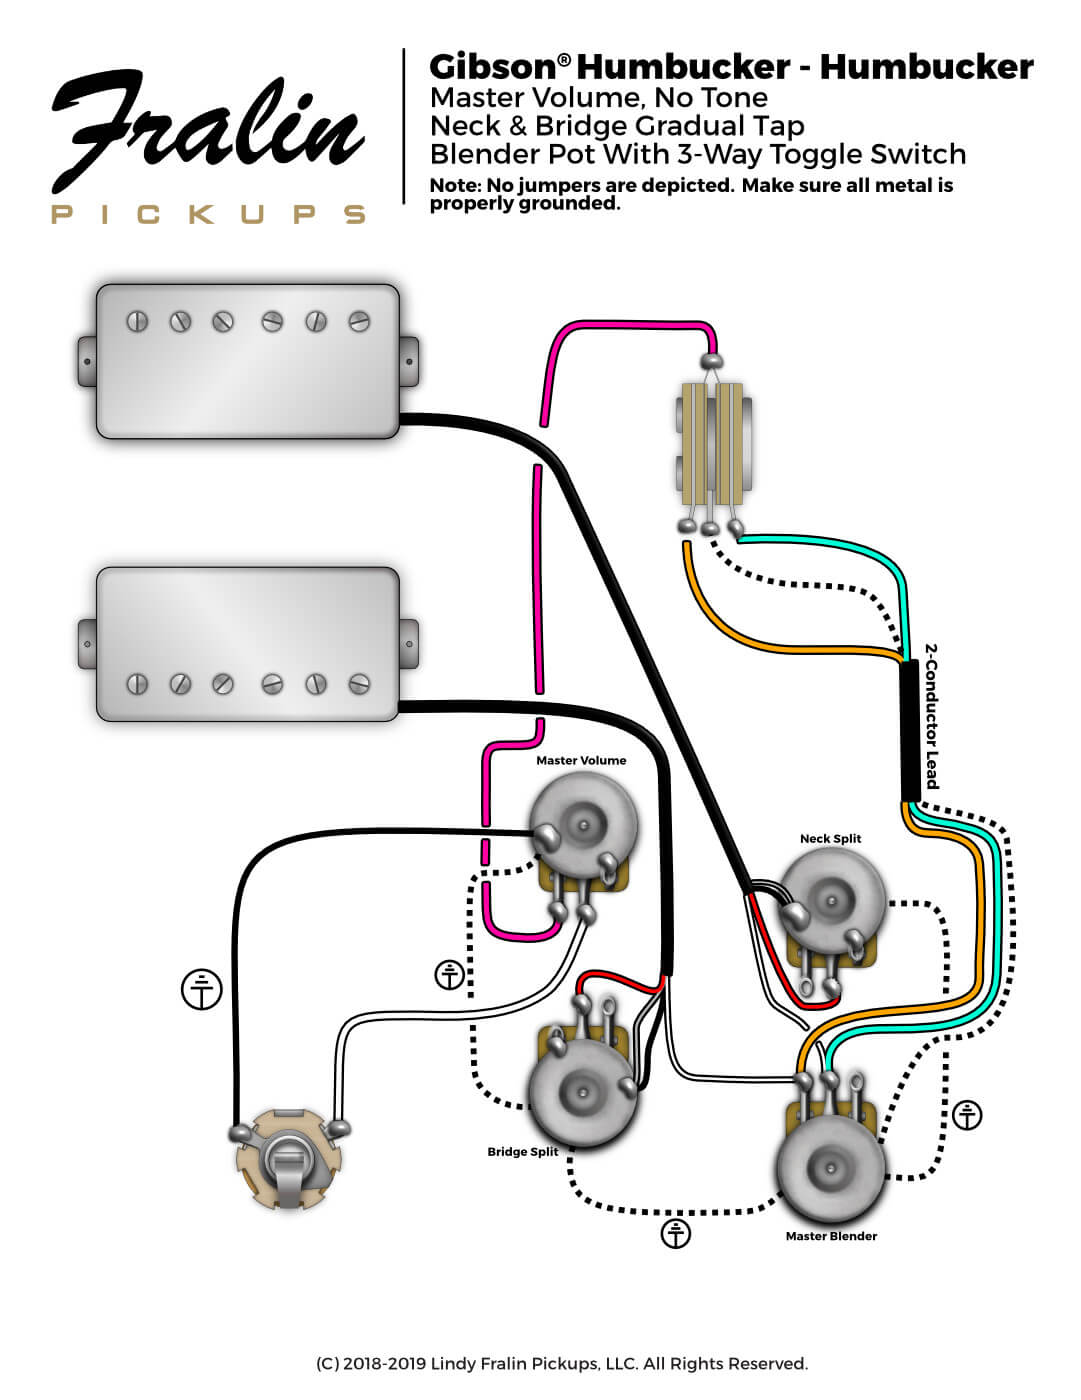 Wiring Diagrams For Gibson Guitars Wiring Diagram